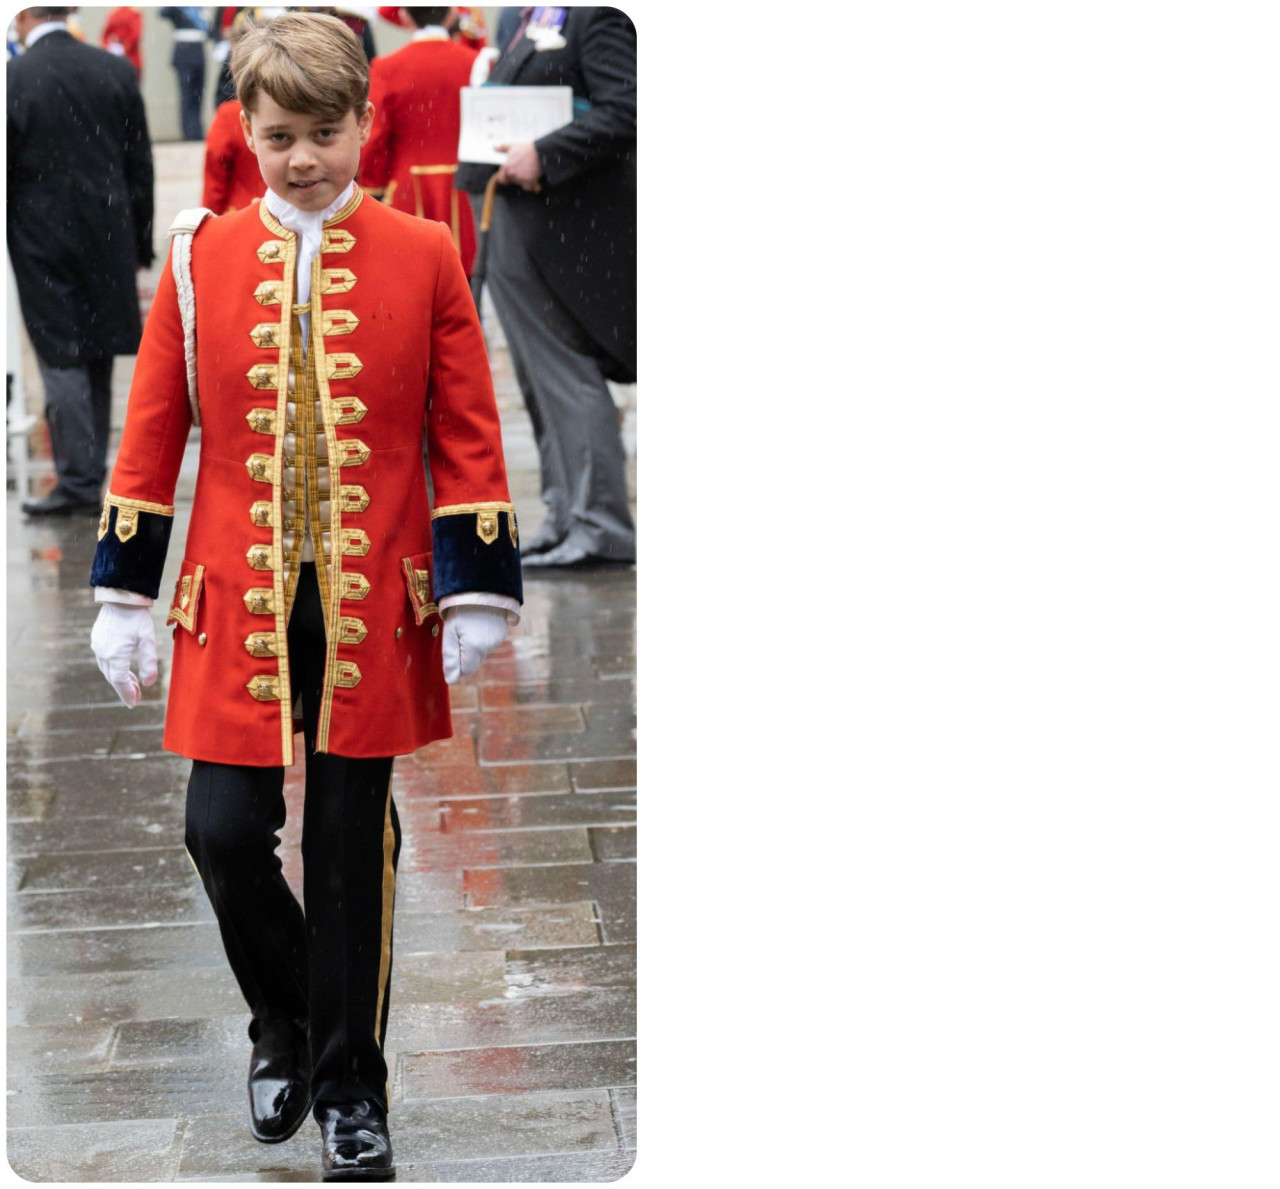 The young prince looking dapper in his page uniform. – Twitter pic